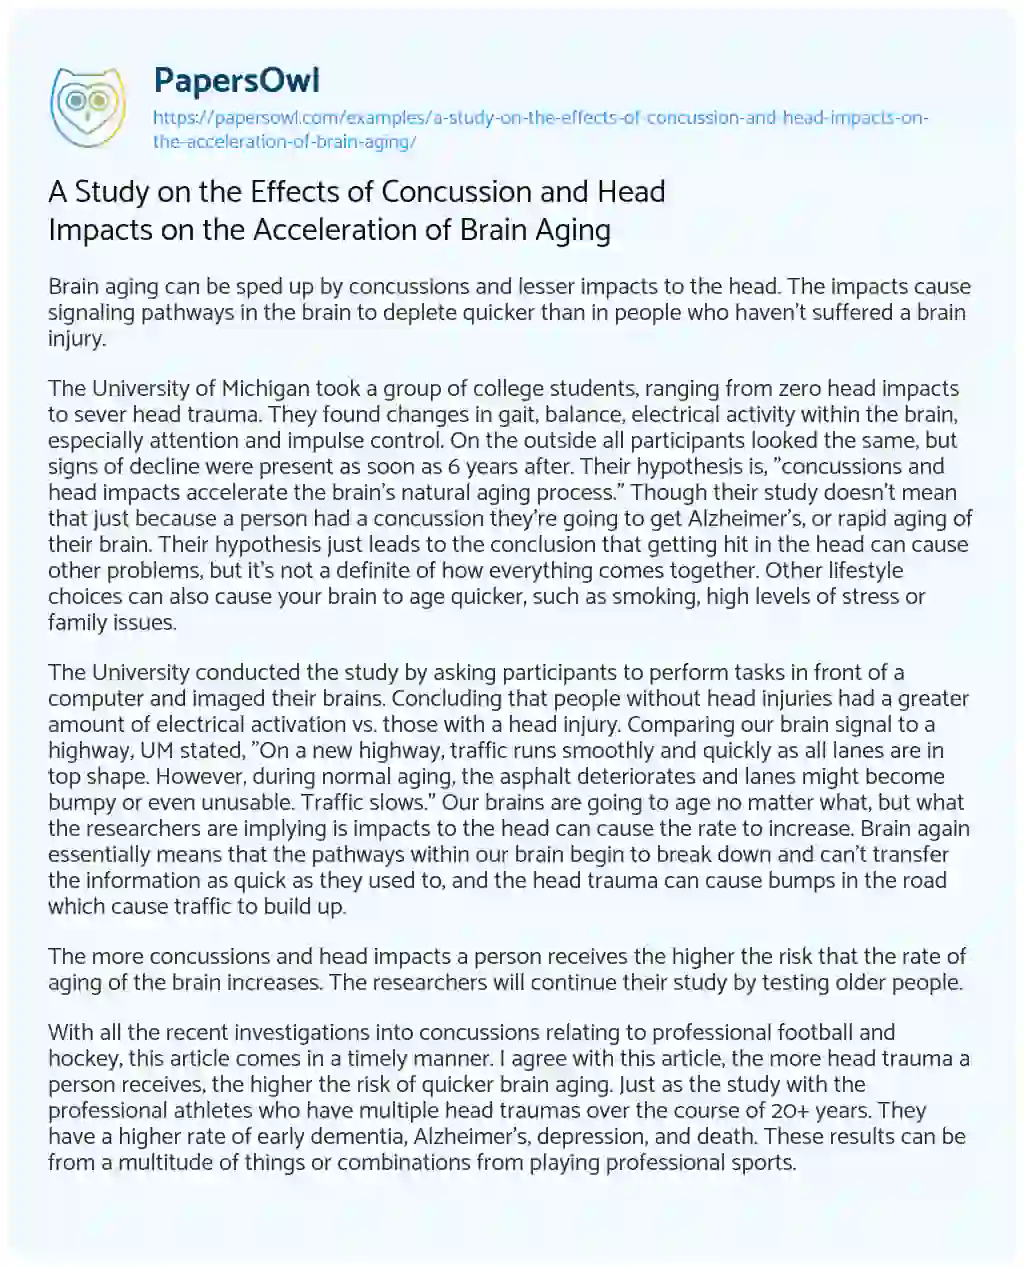 Essay on A Study on the Effects of Concussion and Head Impacts on the Acceleration of Brain Aging